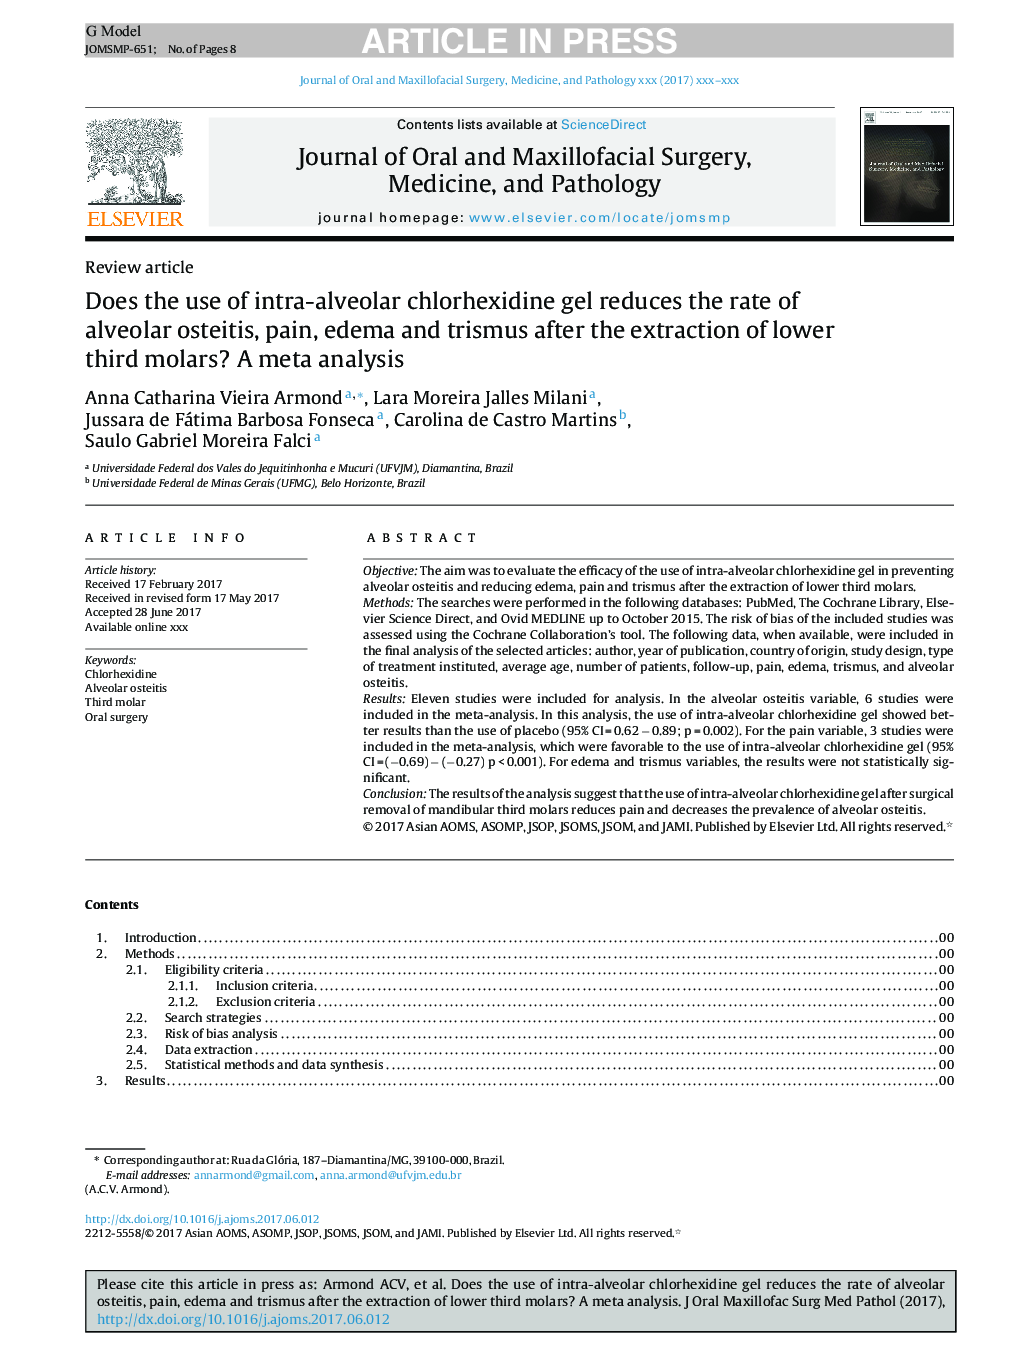 Does the use of intra-alveolar chlorhexidine gel reduces the rate of alveolar osteitis, pain, edema and trismus after the extraction of lower third molars? A meta analysis